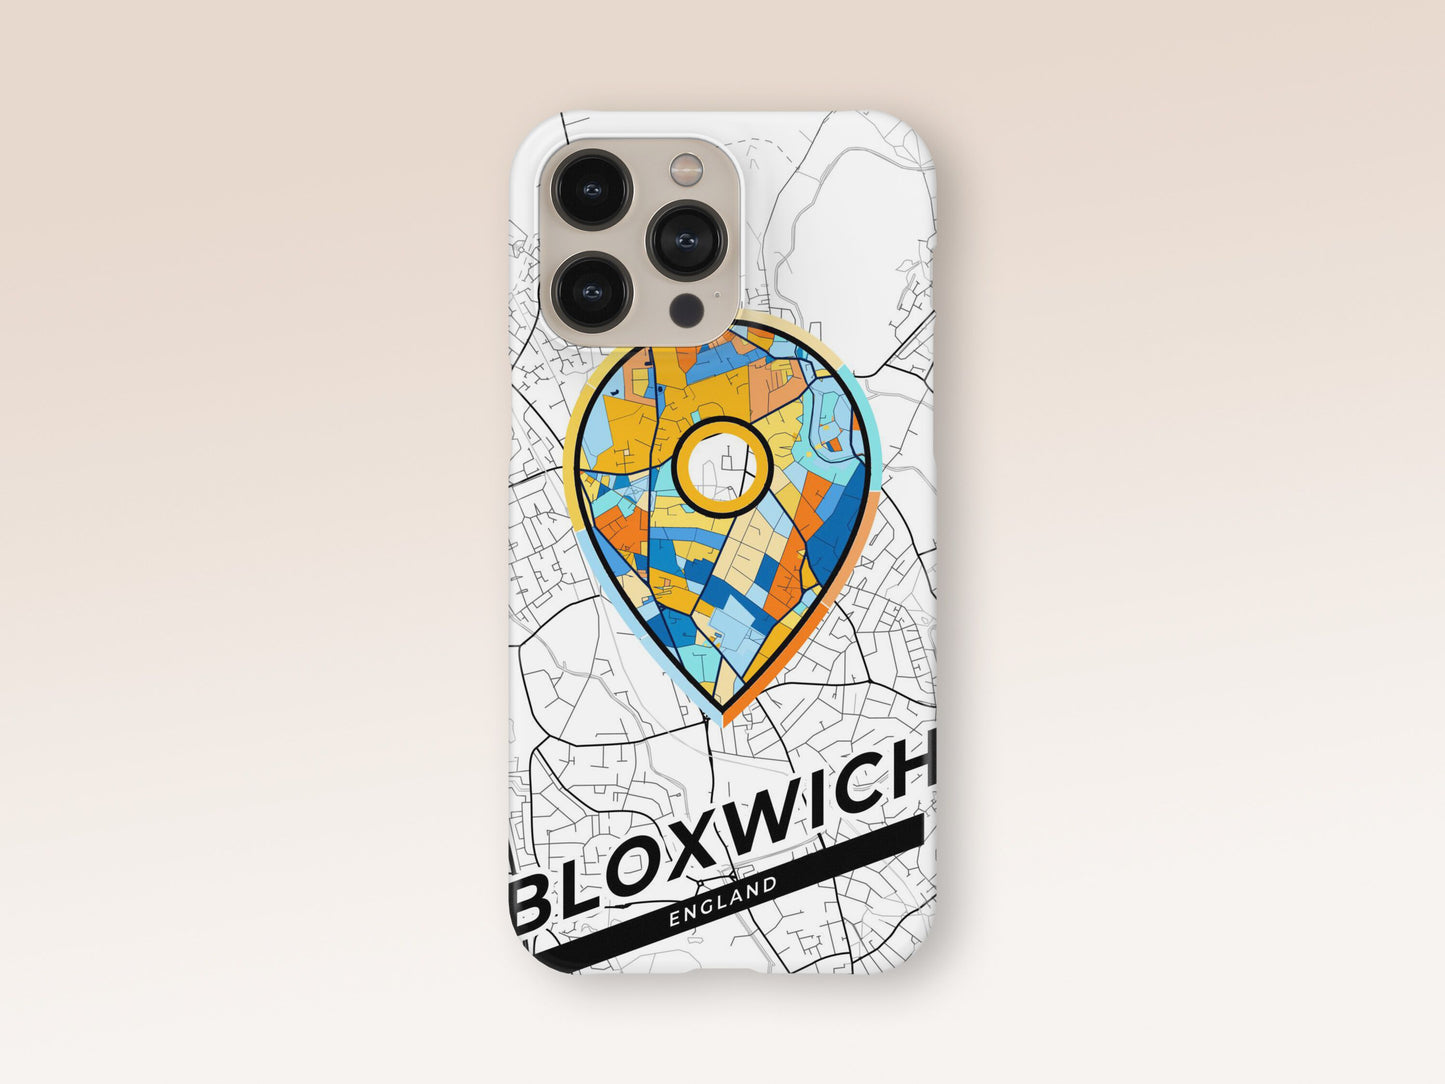 Bloxwich England slim phone case with colorful icon. Birthday, wedding or housewarming gift. Couple match cases. 1